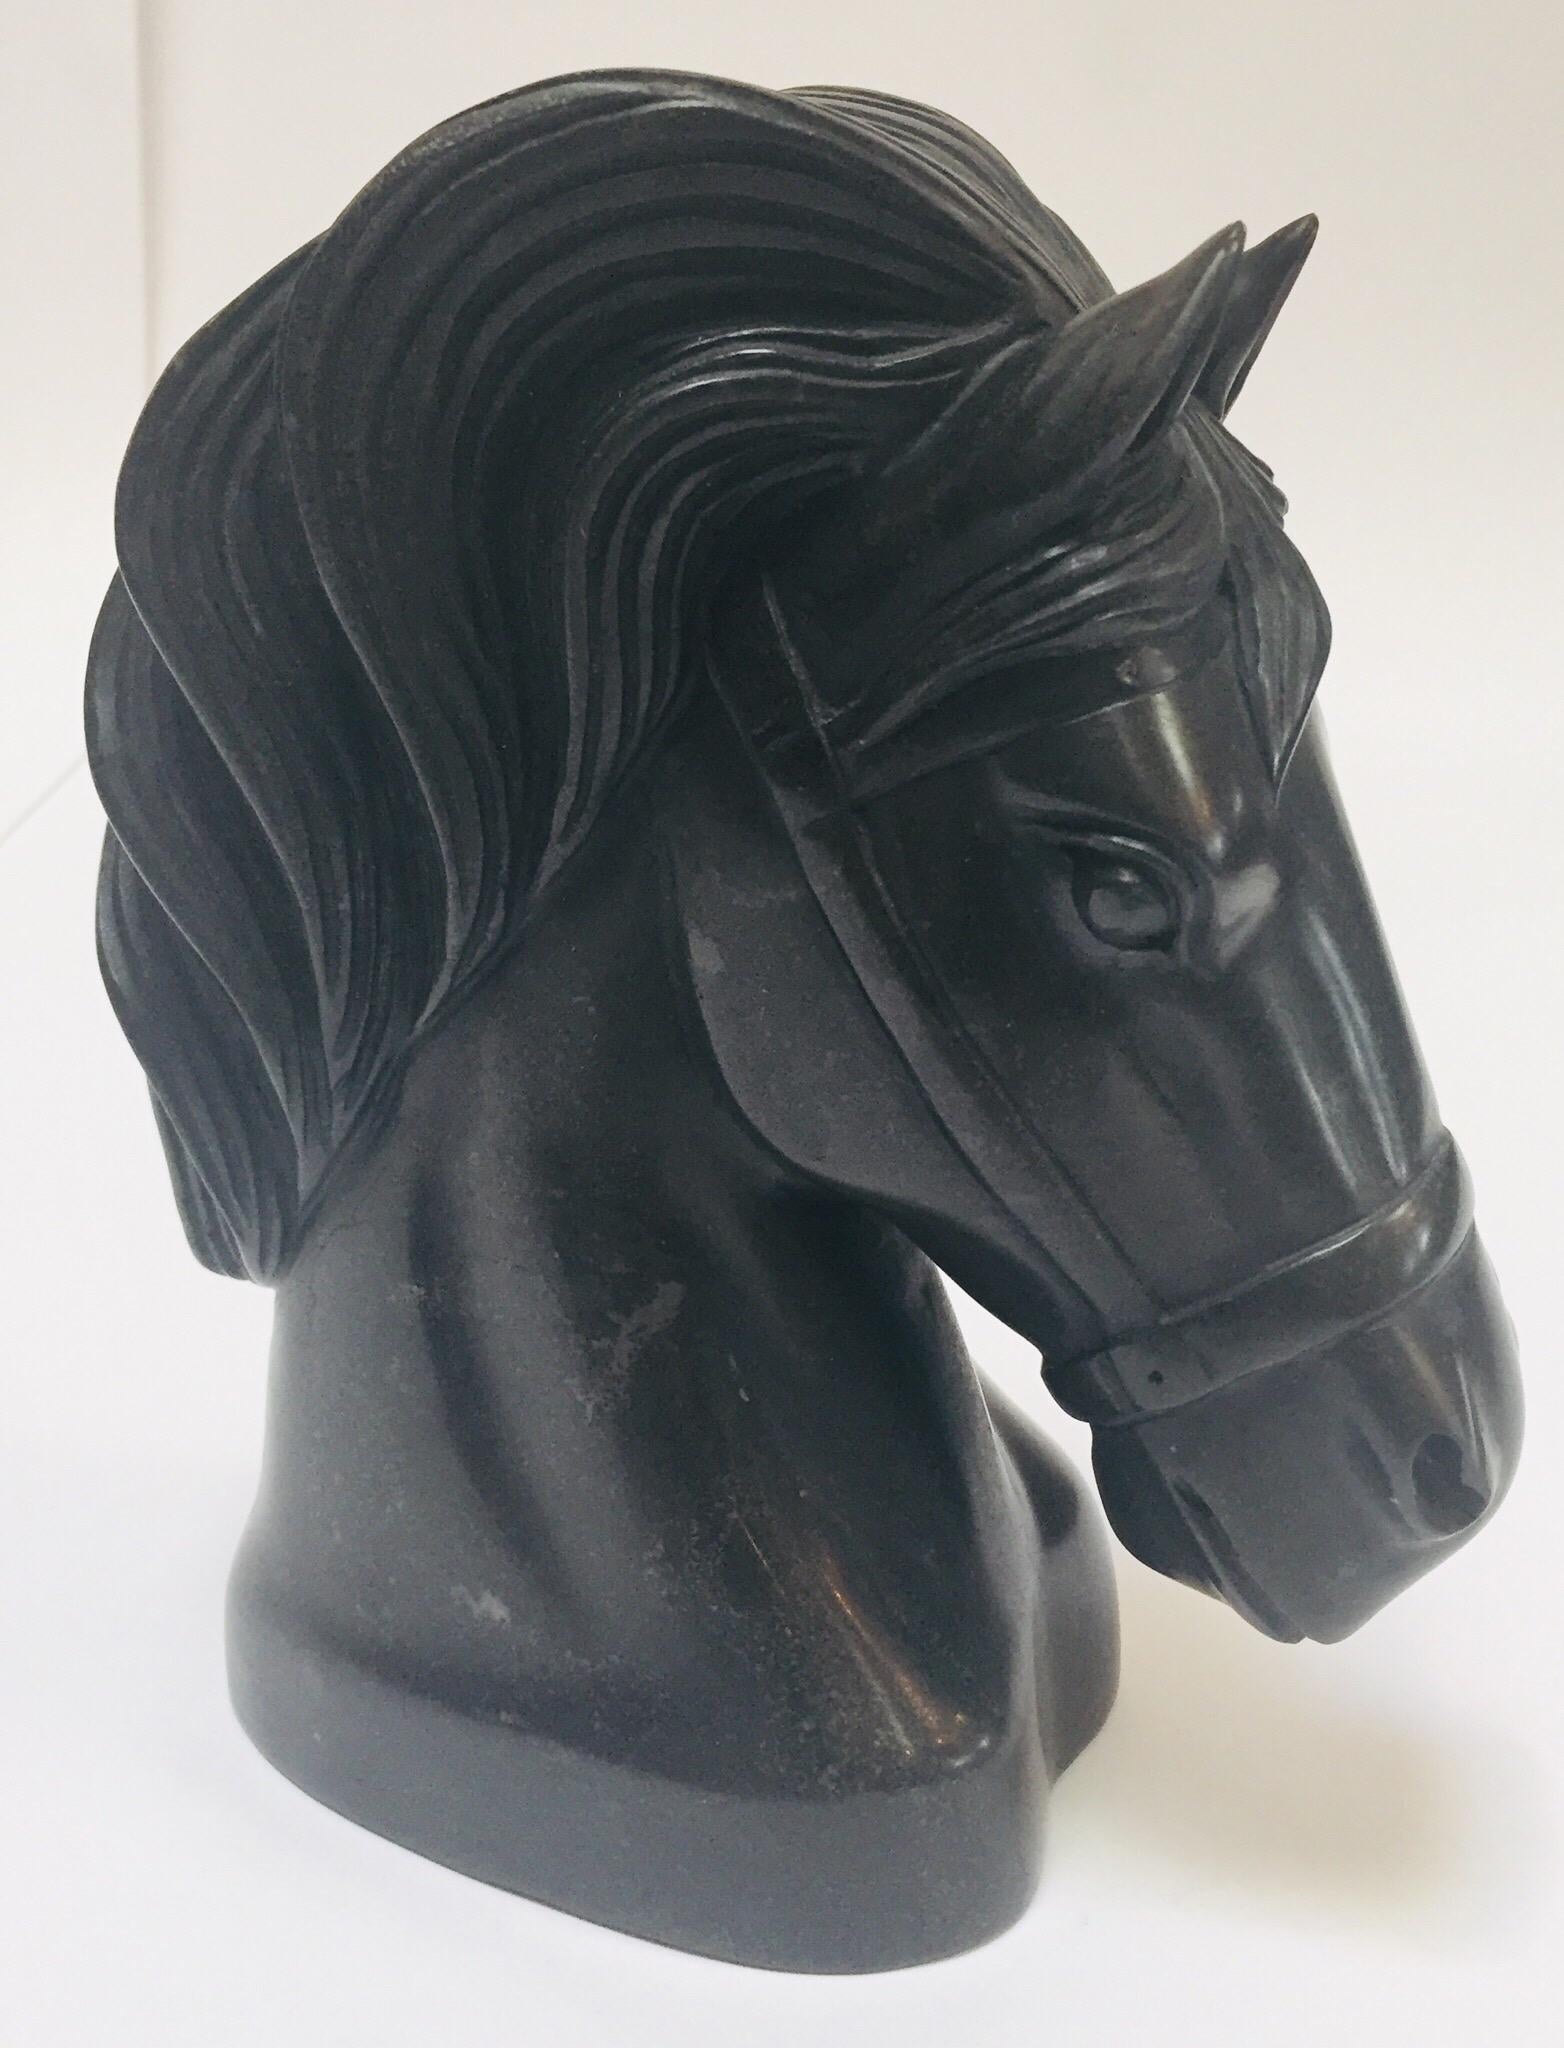 Hand-Crafted Art Deco Black Marble Sculpture of  Horse Head Bust